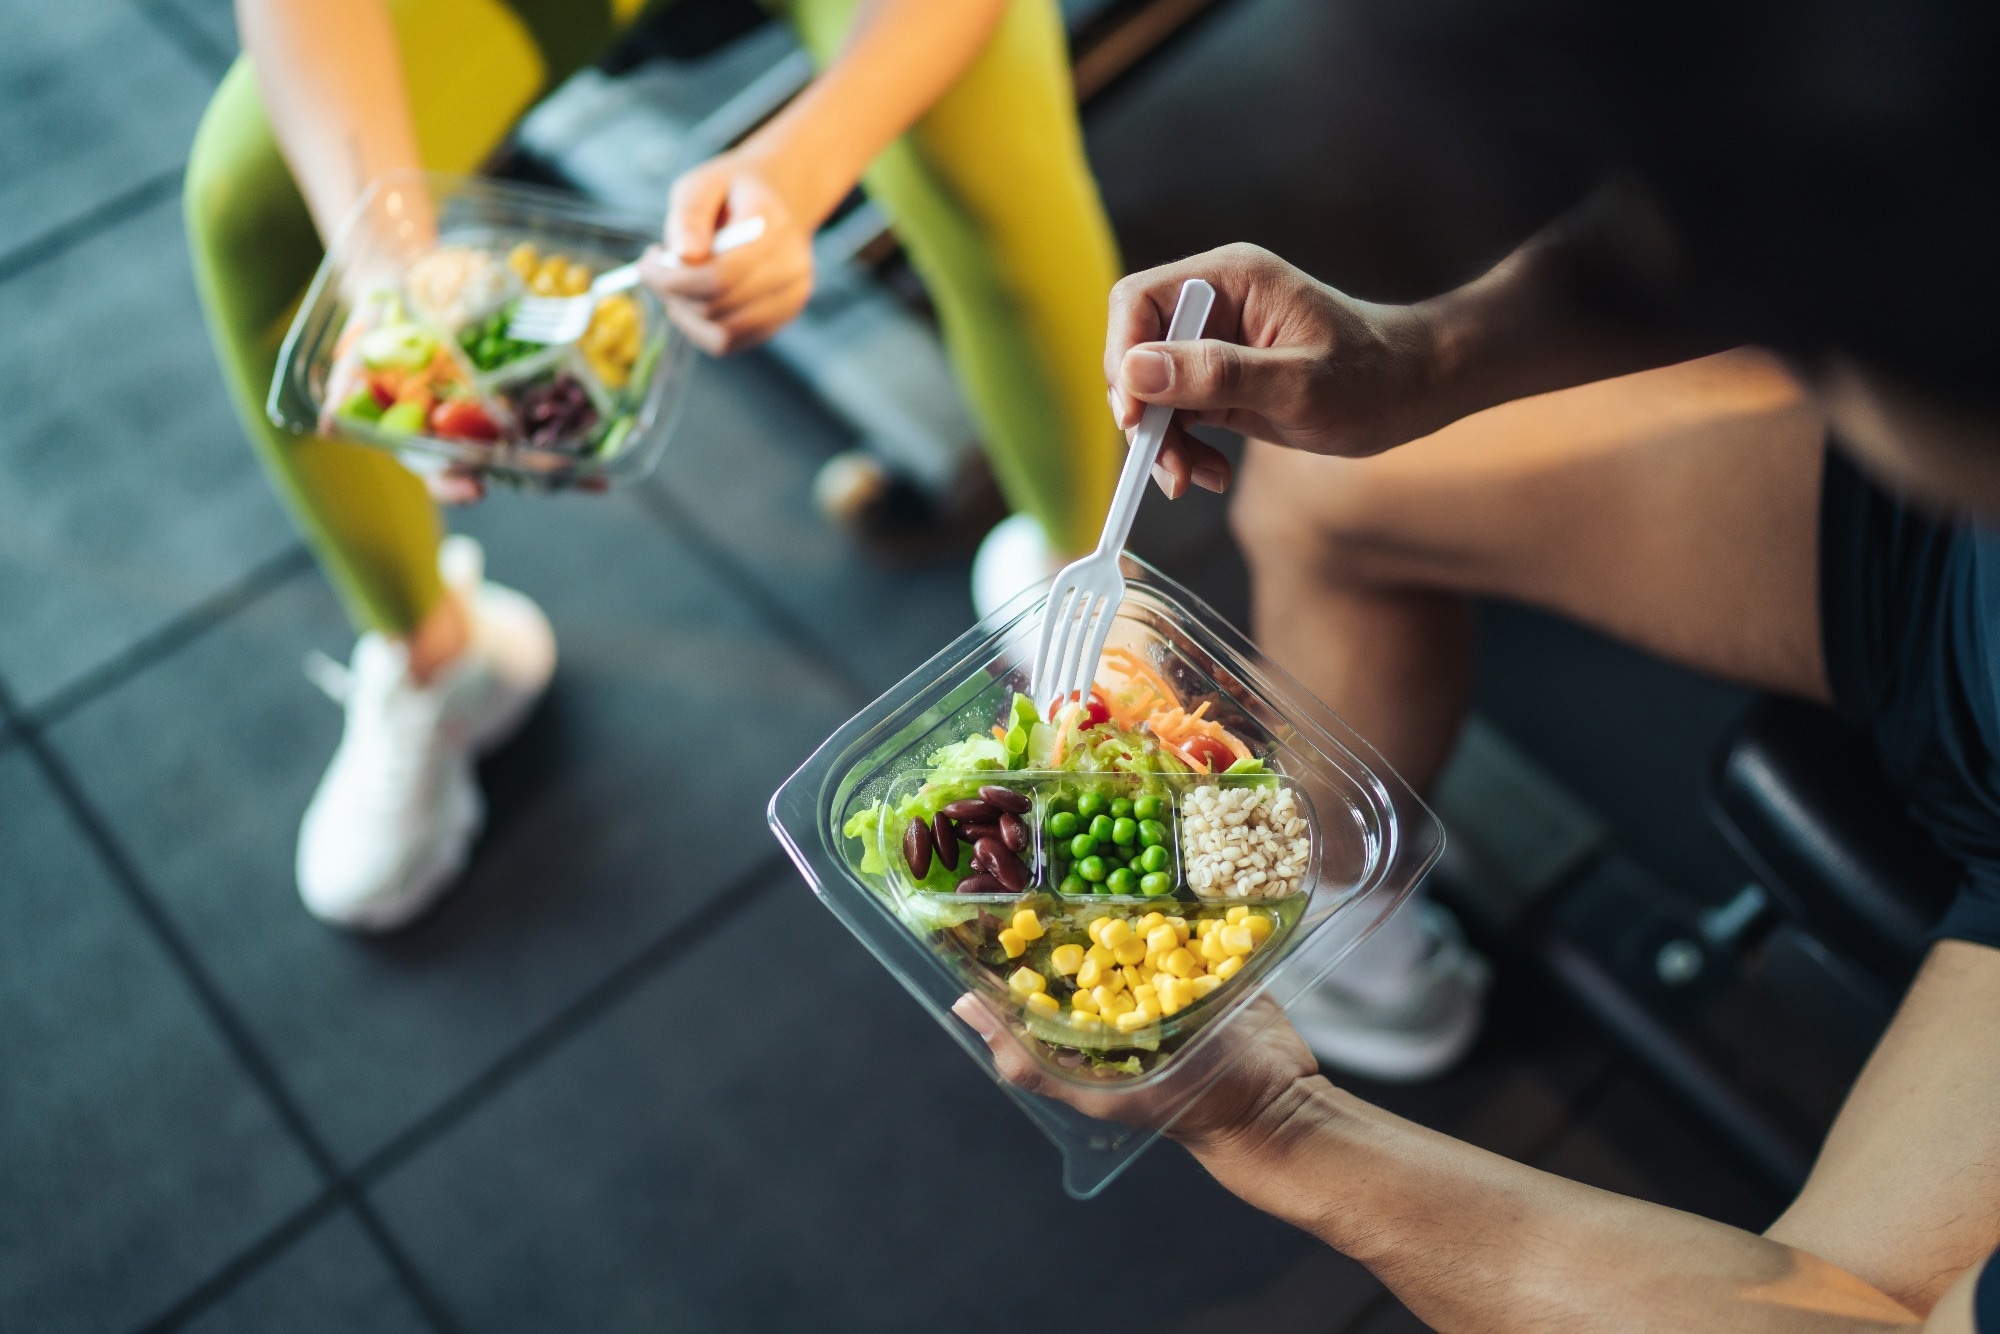 Study: Going Vegan for the Gain: A Cross-Sectional Study of Vegan Diets in Bodybuilders during Different Preparation Phases. Image Credit: ME Image / Shutterstock